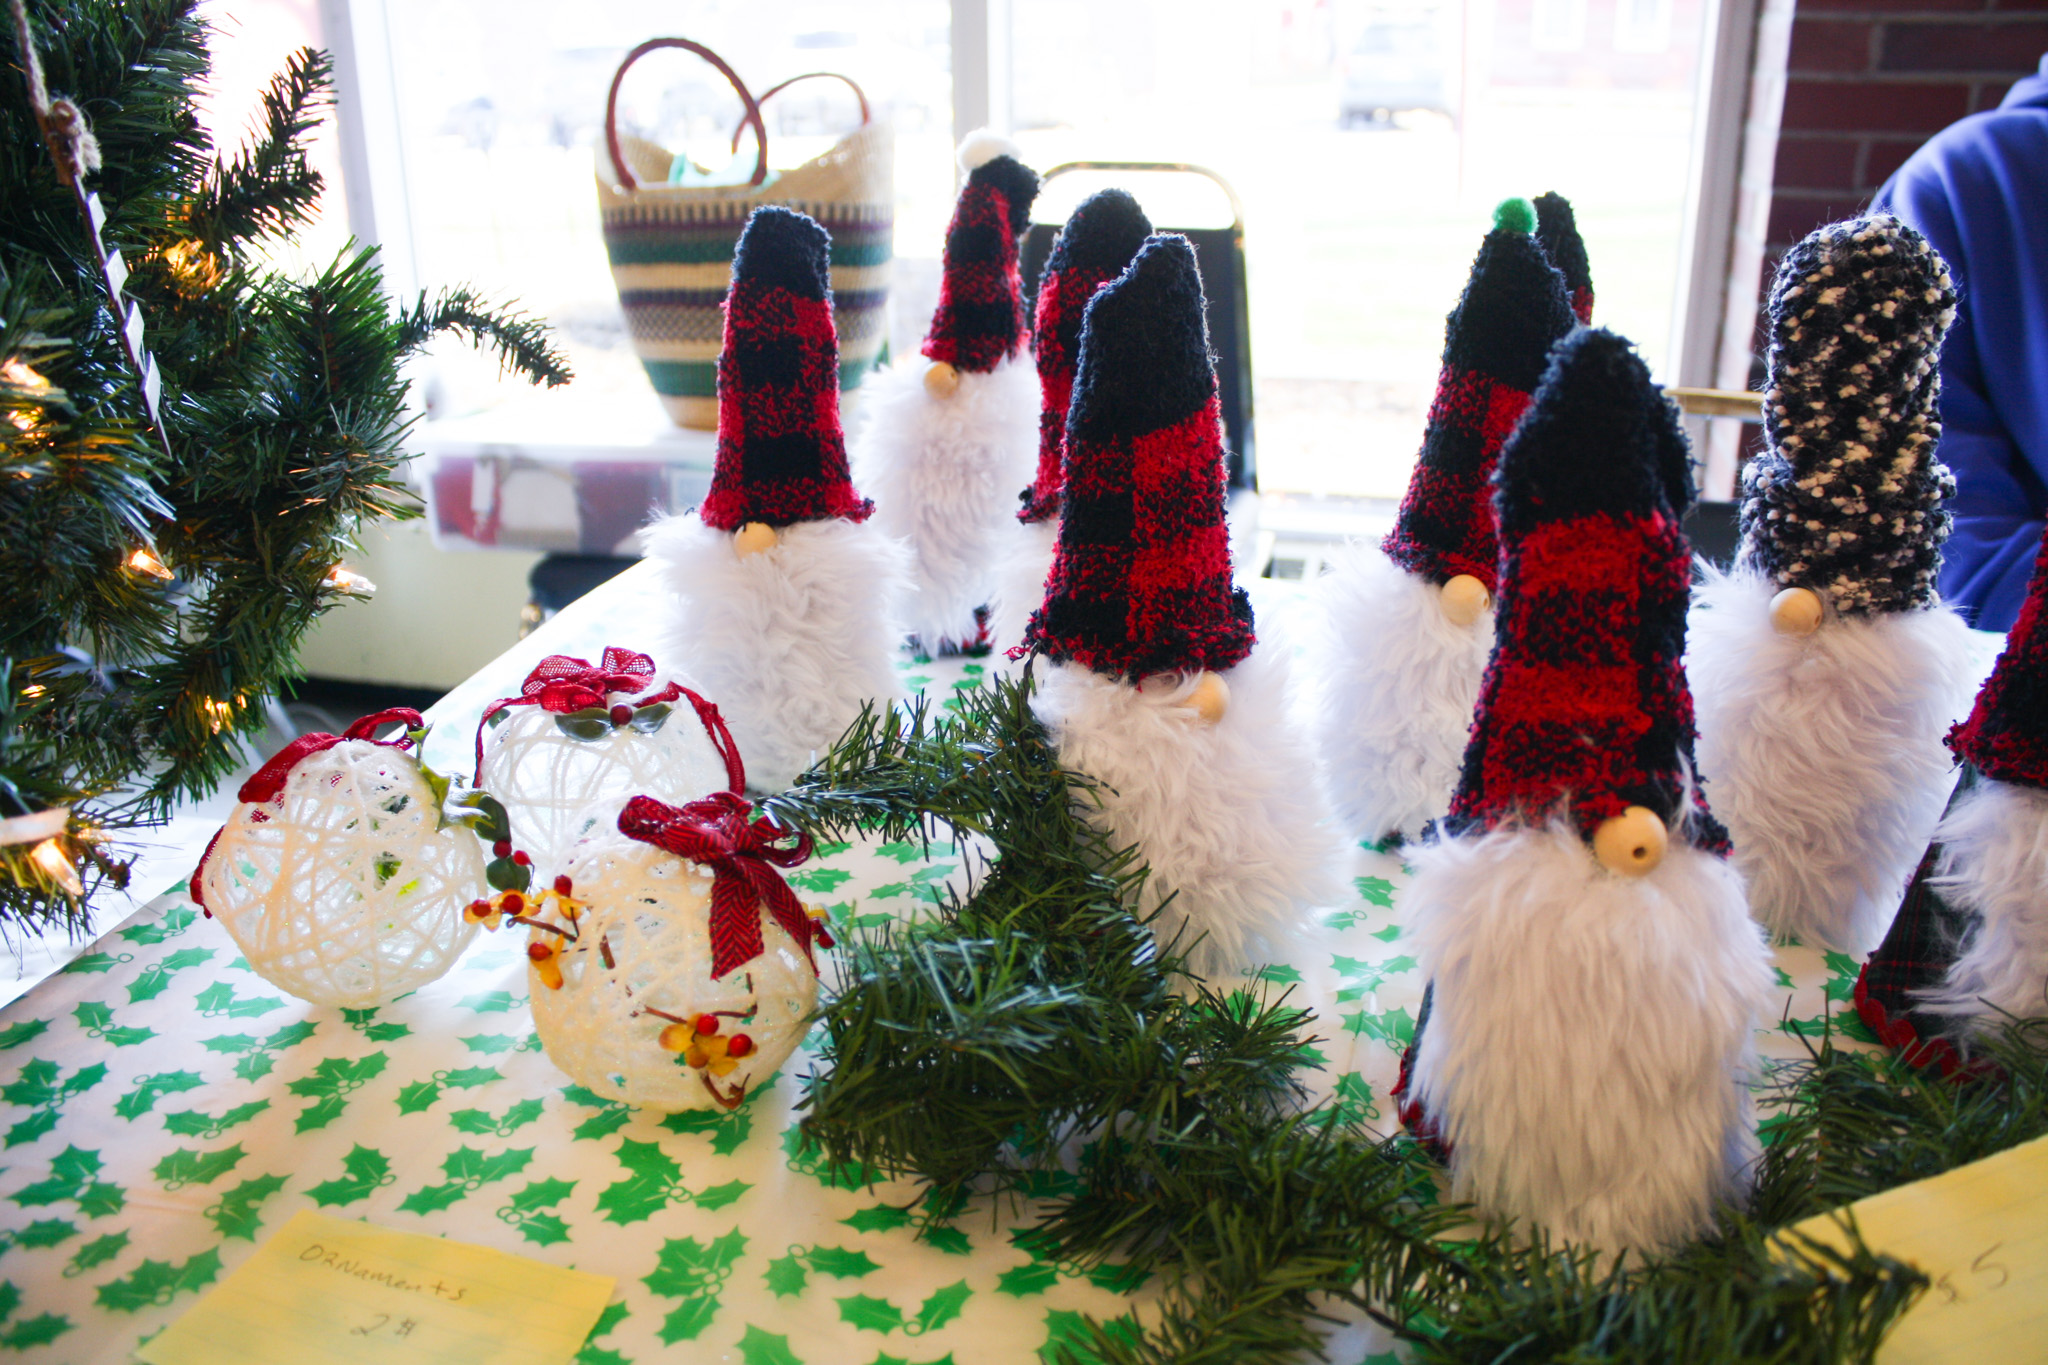 Several craft gnomes with fluffy white beards and tall hats stand among garland.